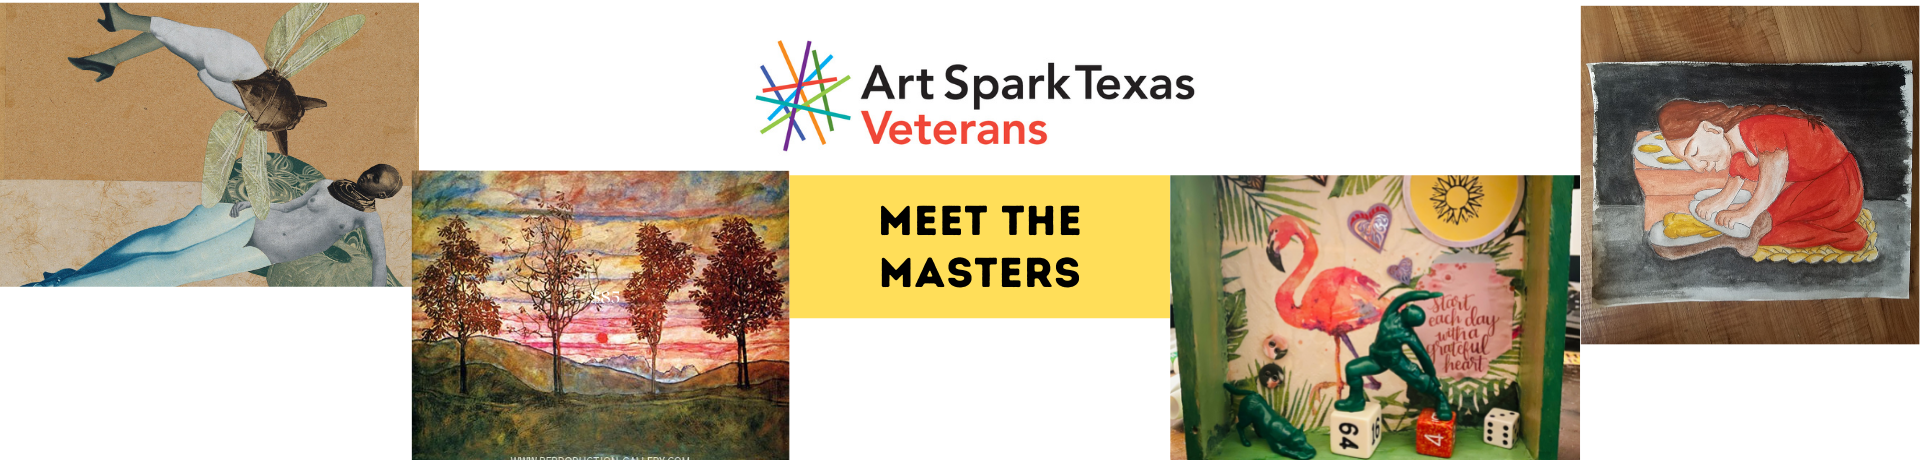 row of art images with Art Spark Texas Veterans logo and text Meet the Masters